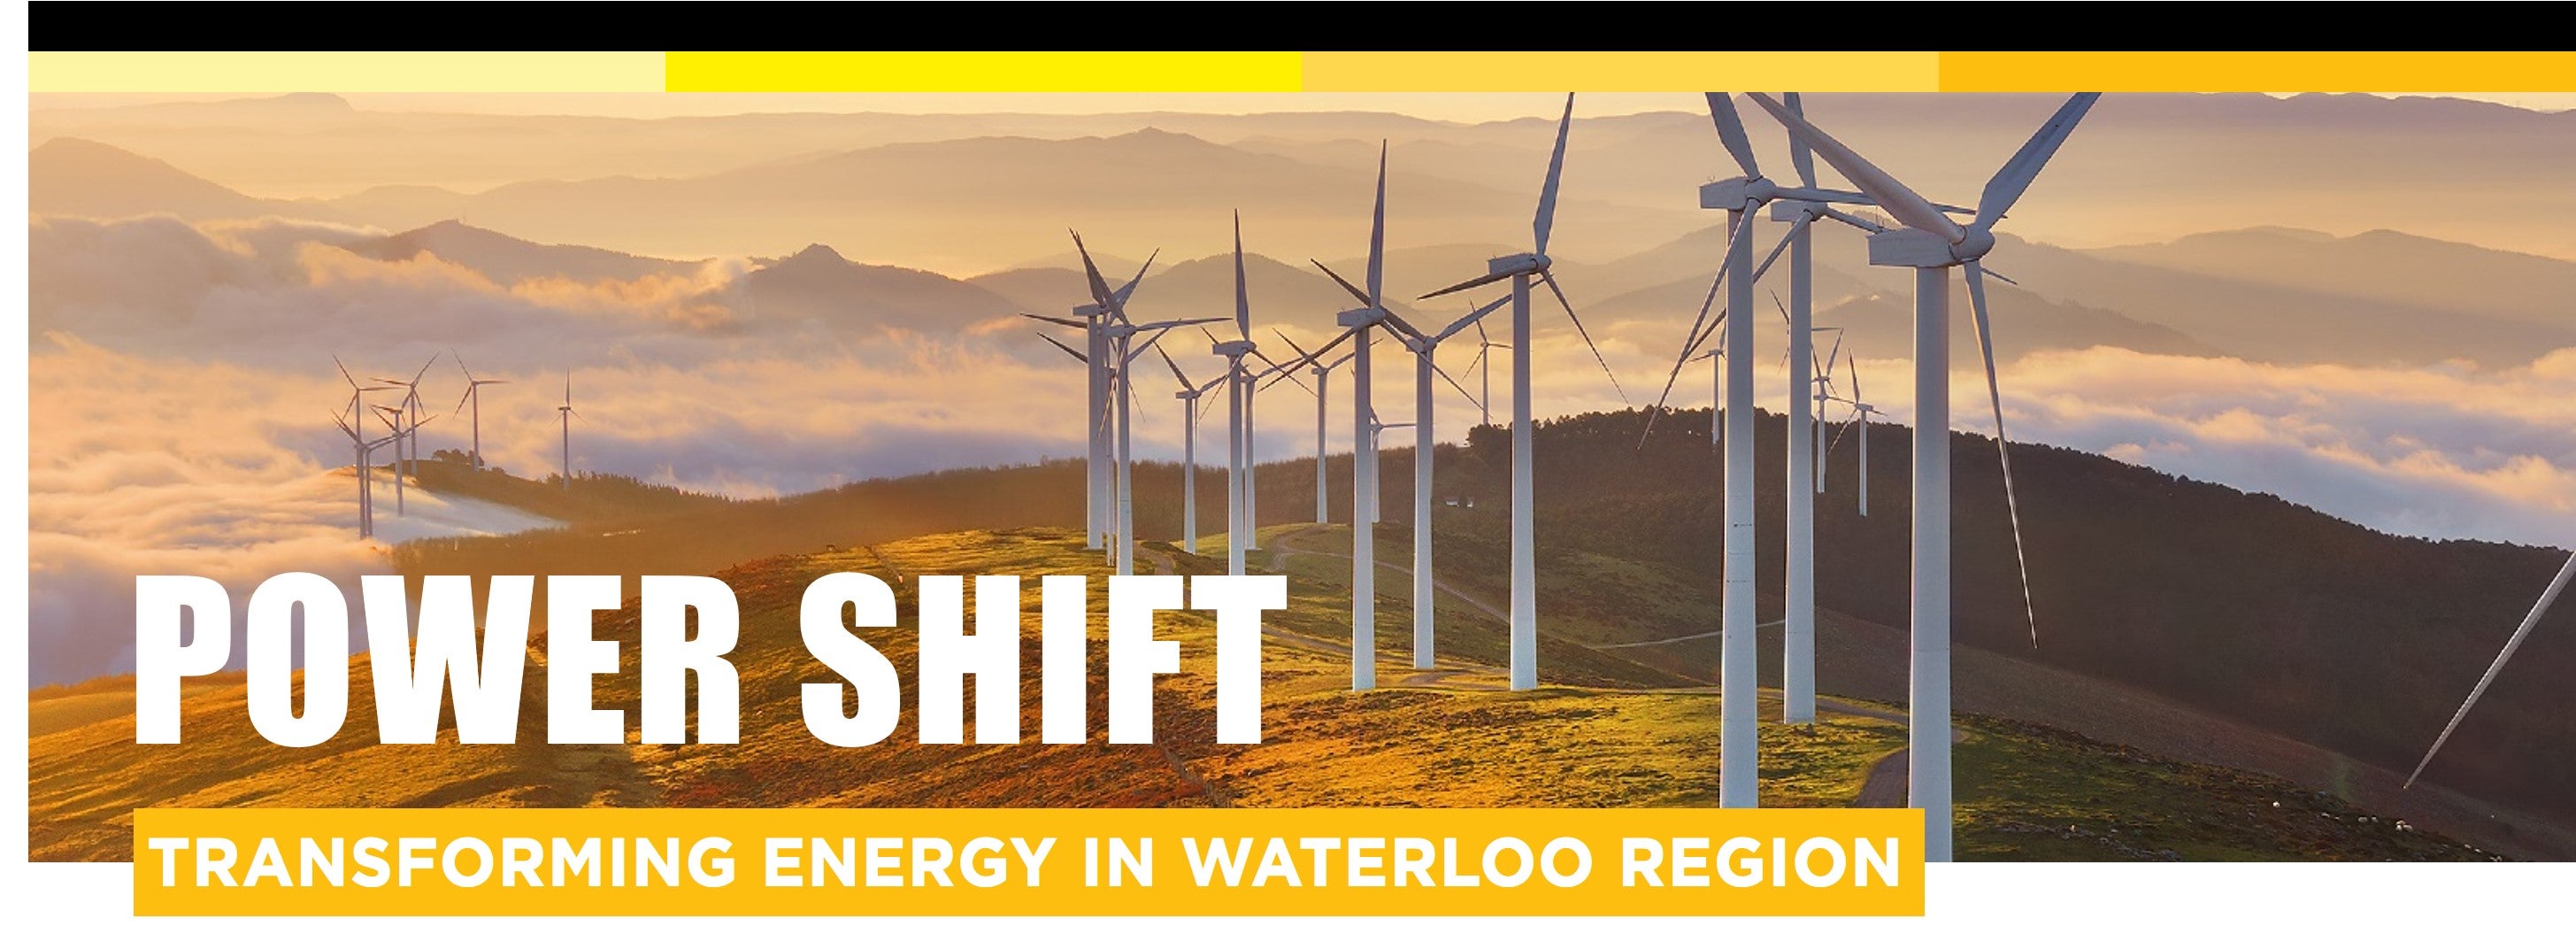 Power Shift - Transforming energy in Waterloo Region - header image with windmills in background